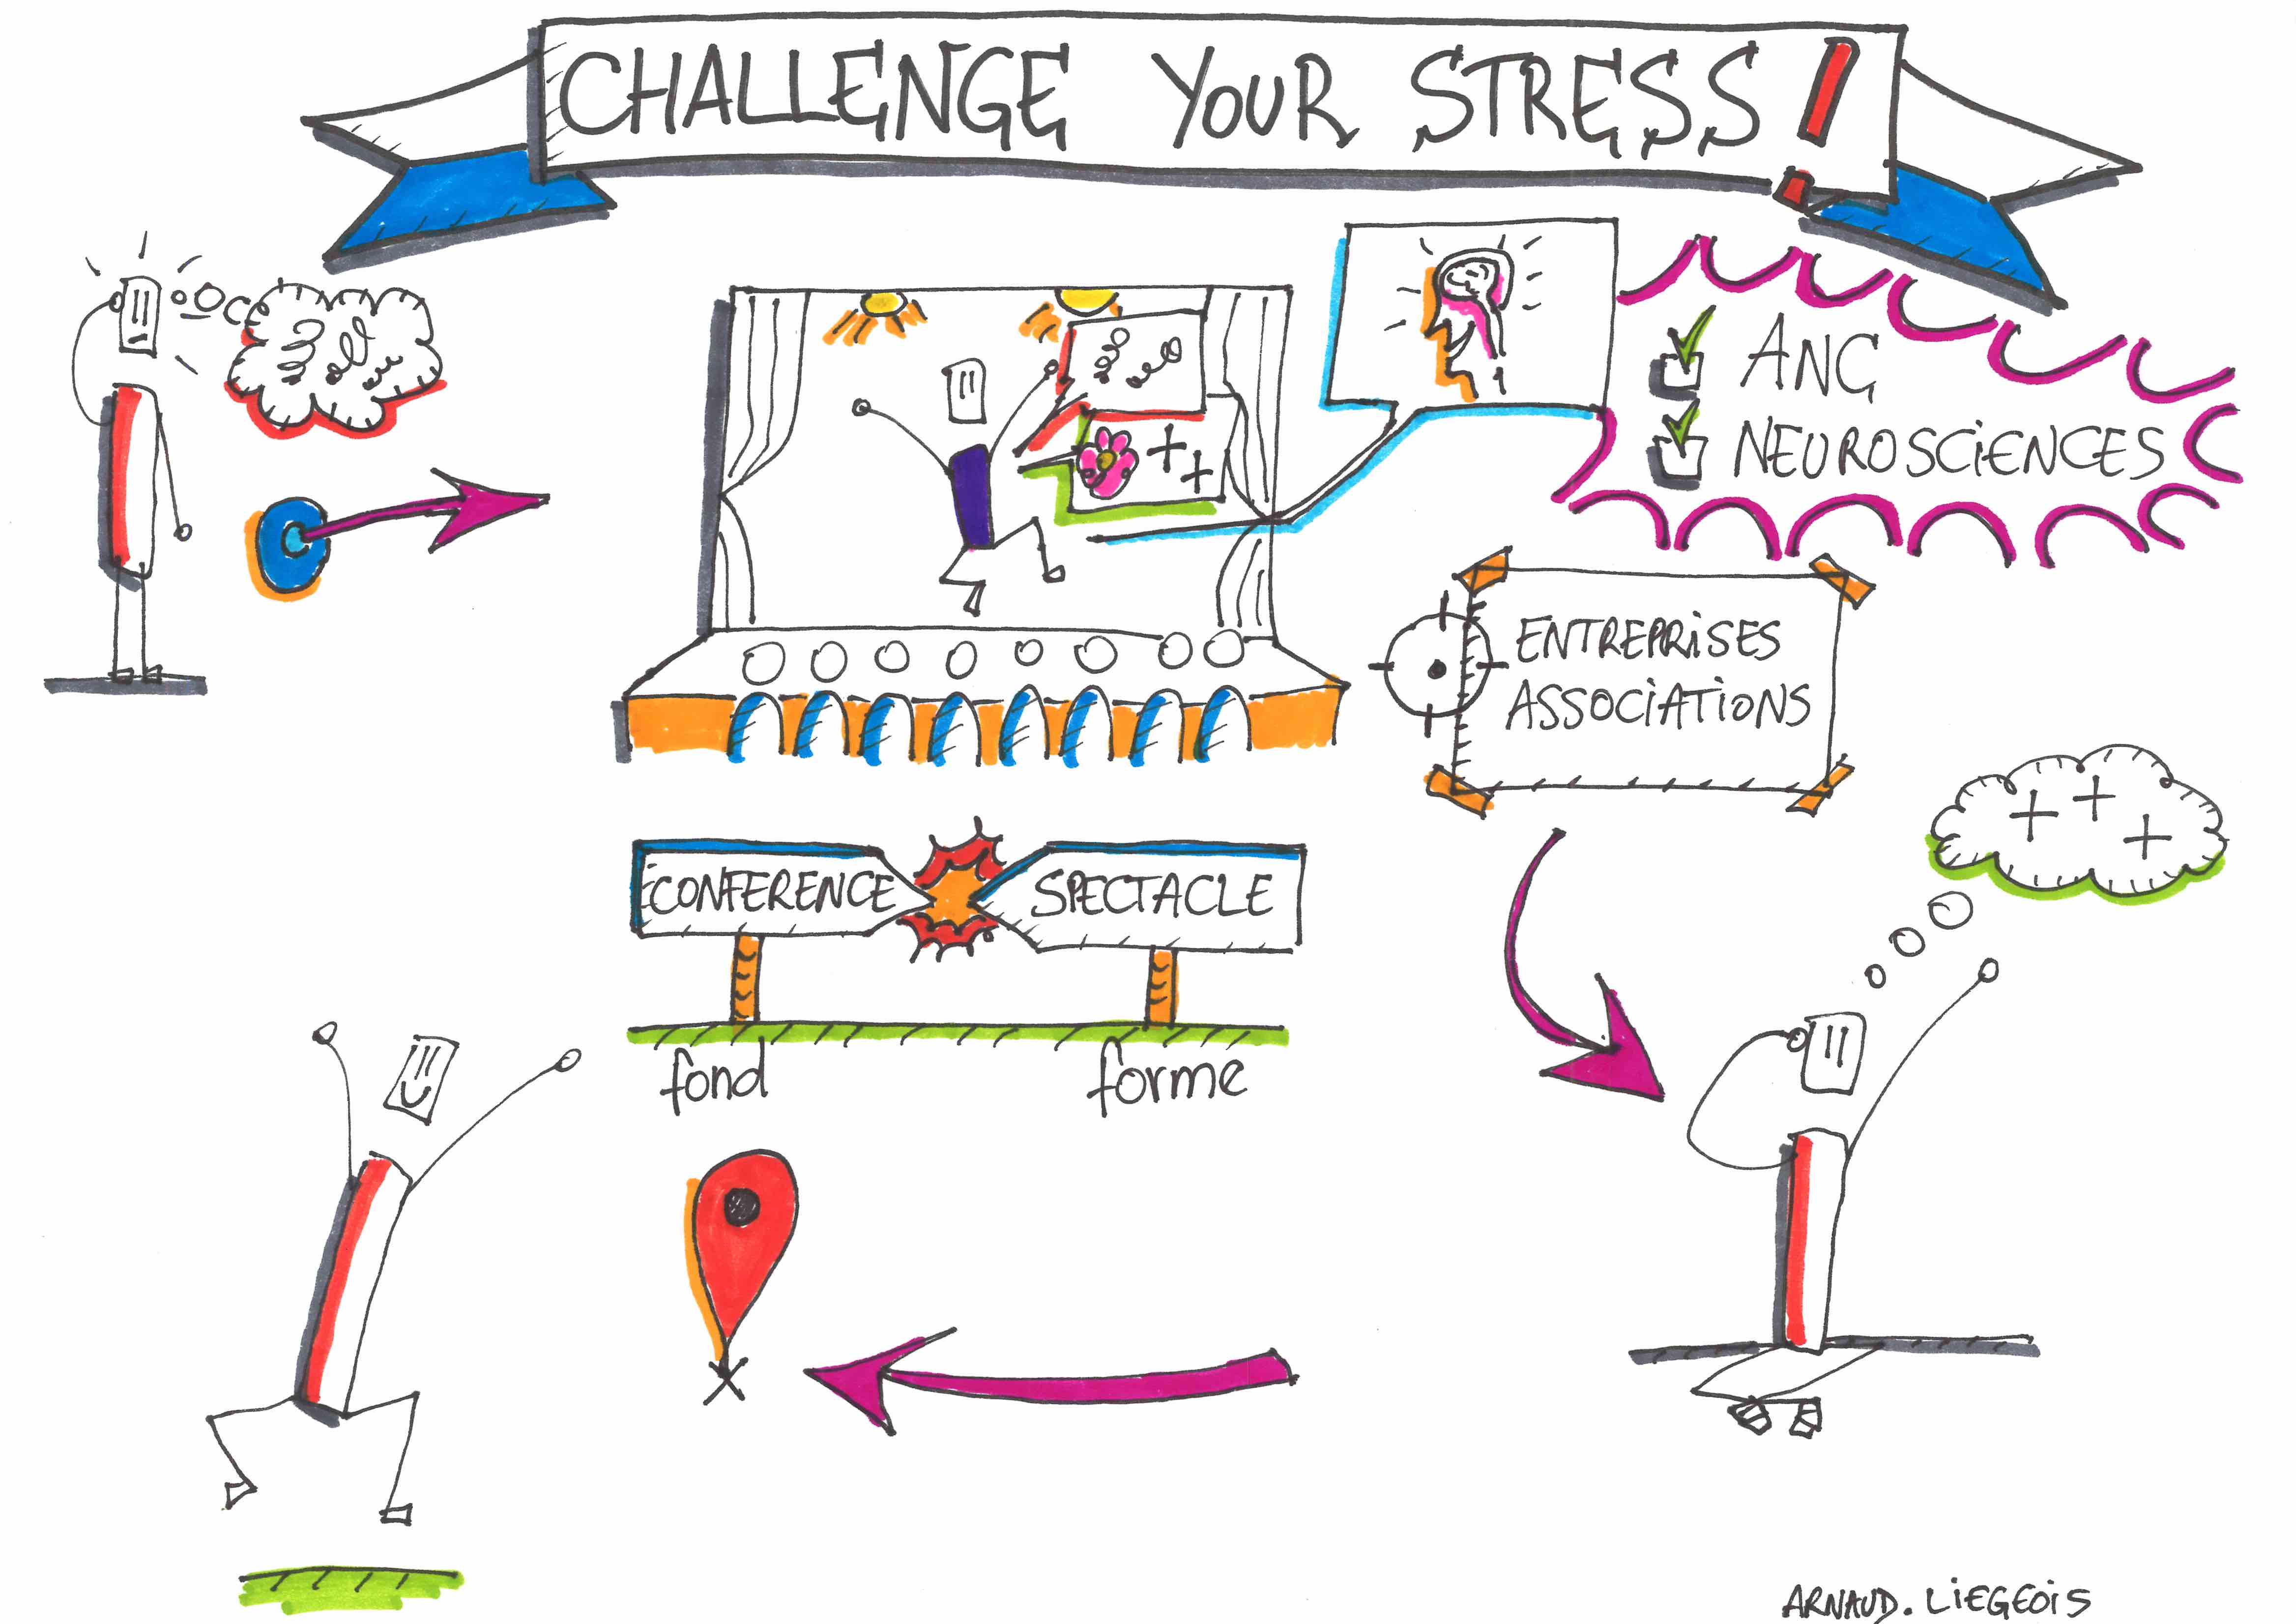 Challenge your stress !